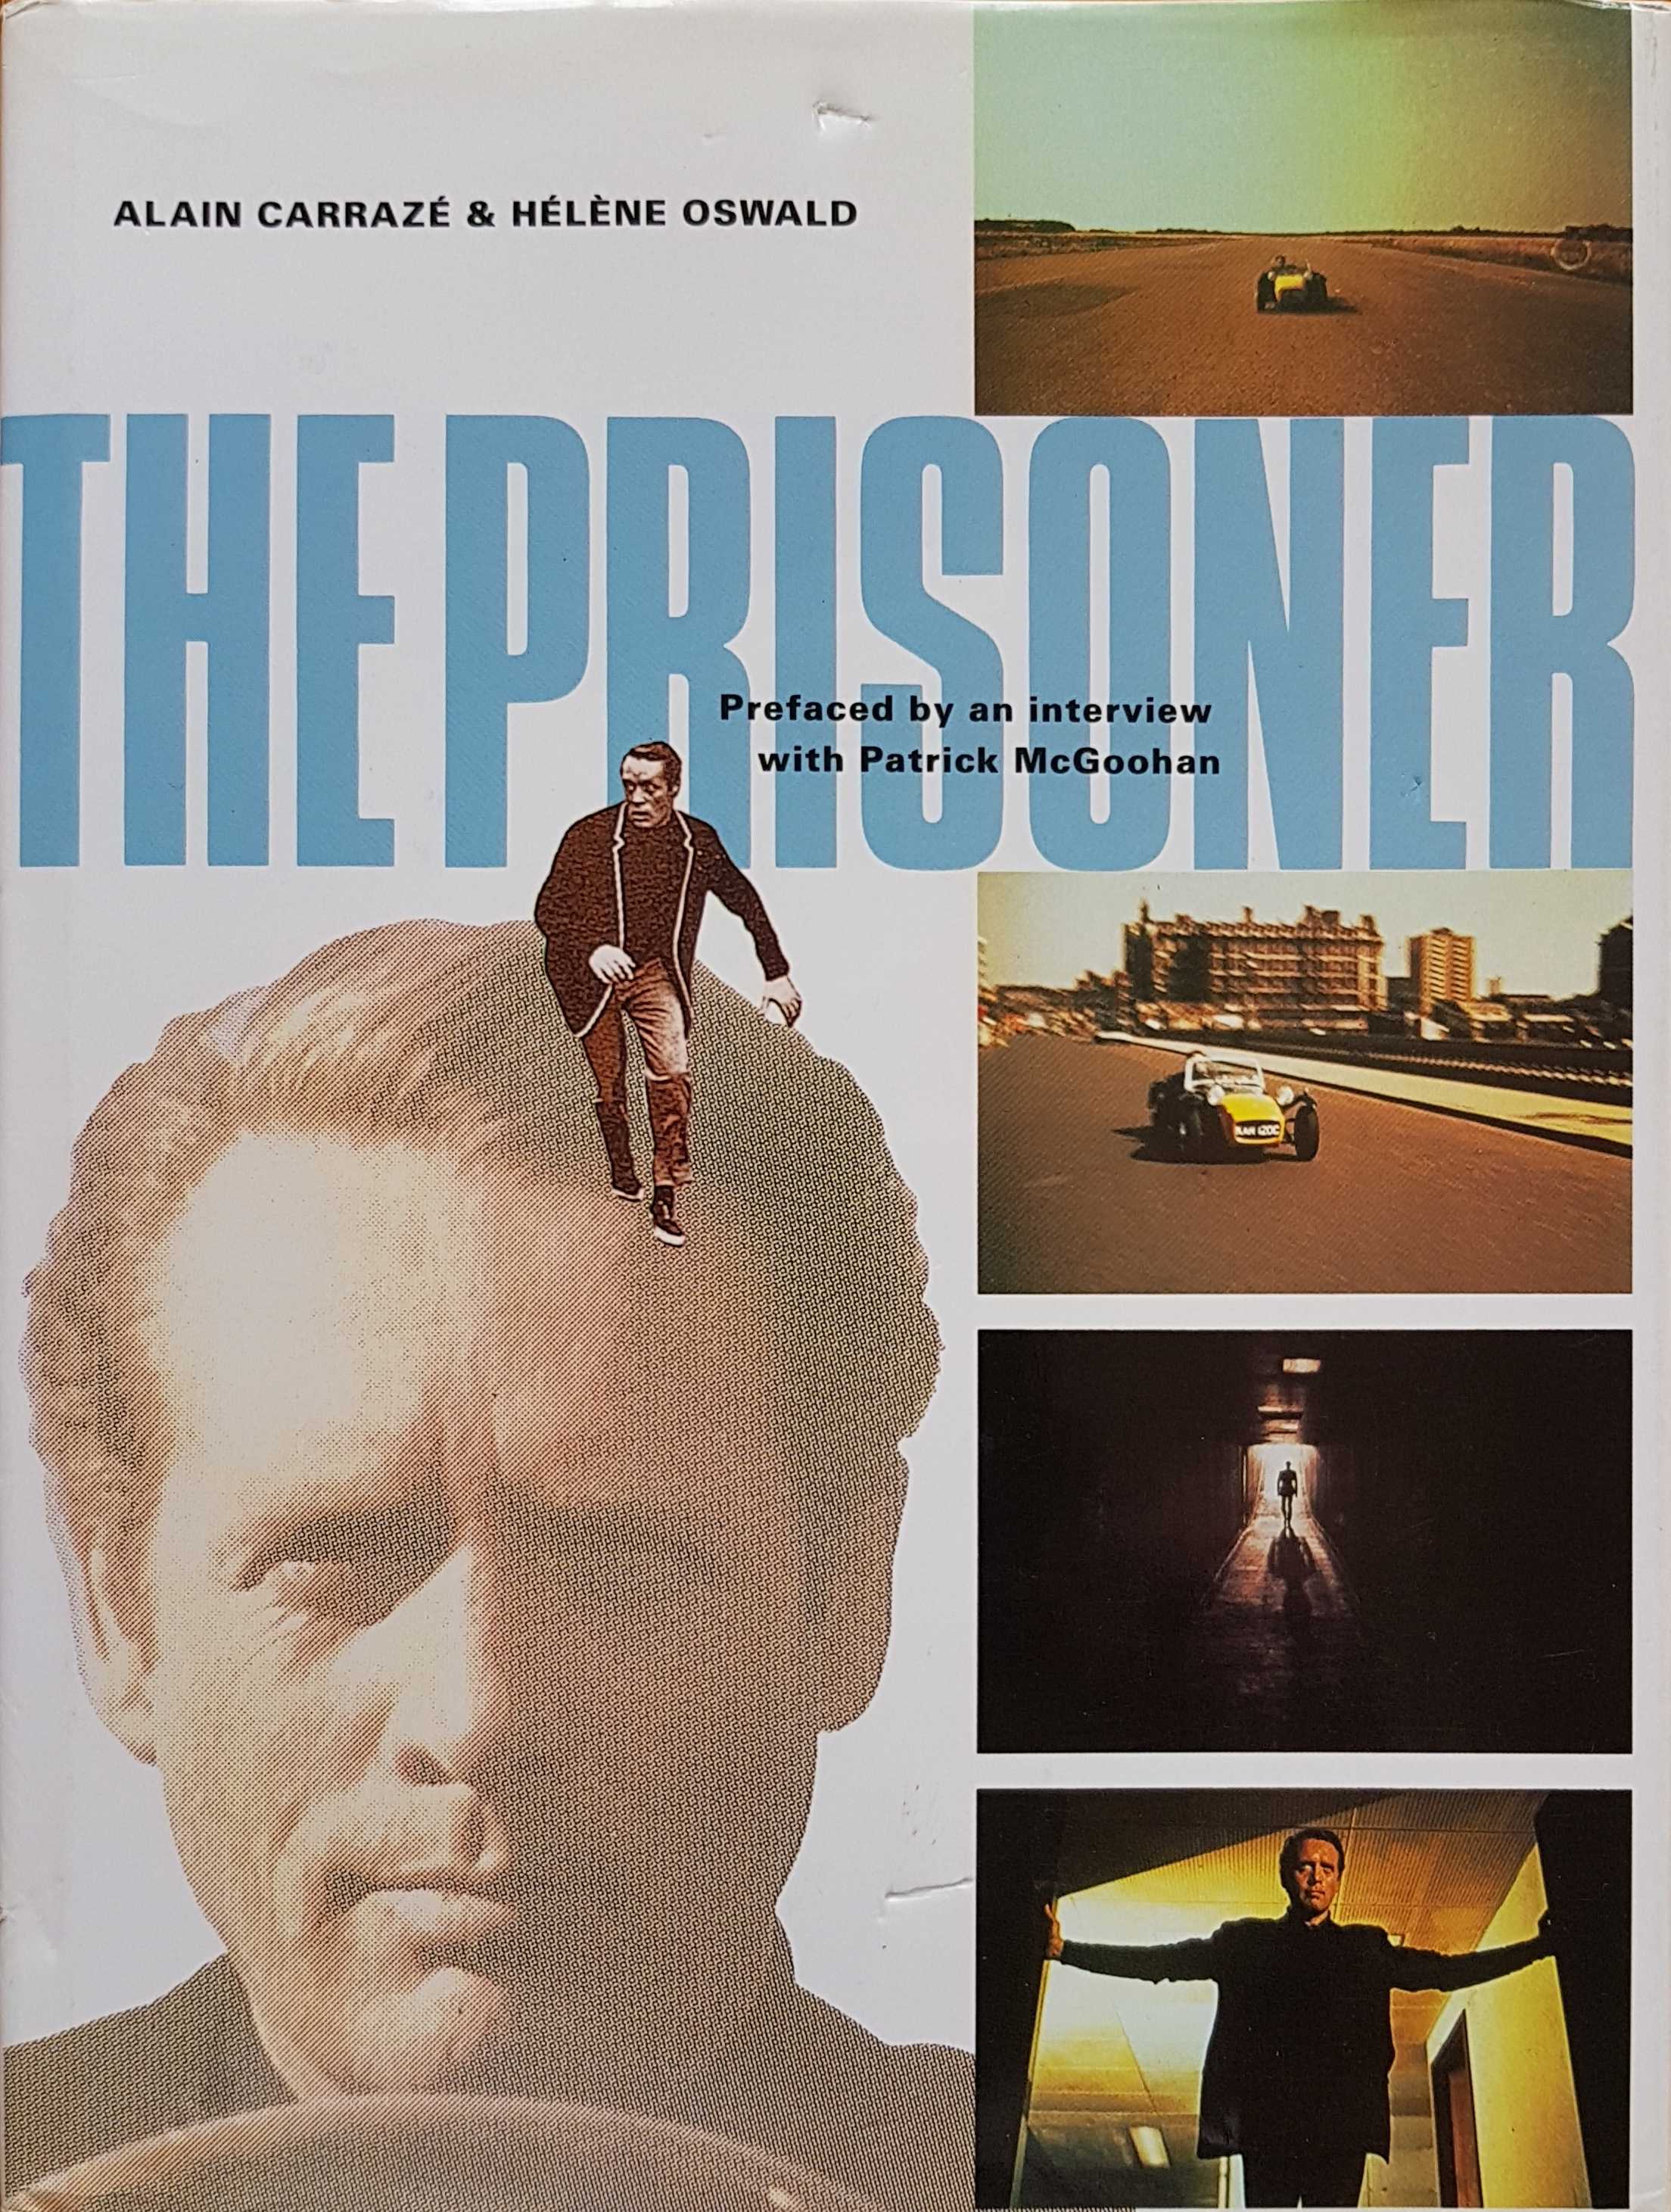 Picture of The prisoner by artist Alain Carraze / Helene Oswald from ITV, Channel 4 and Channel 5 books library